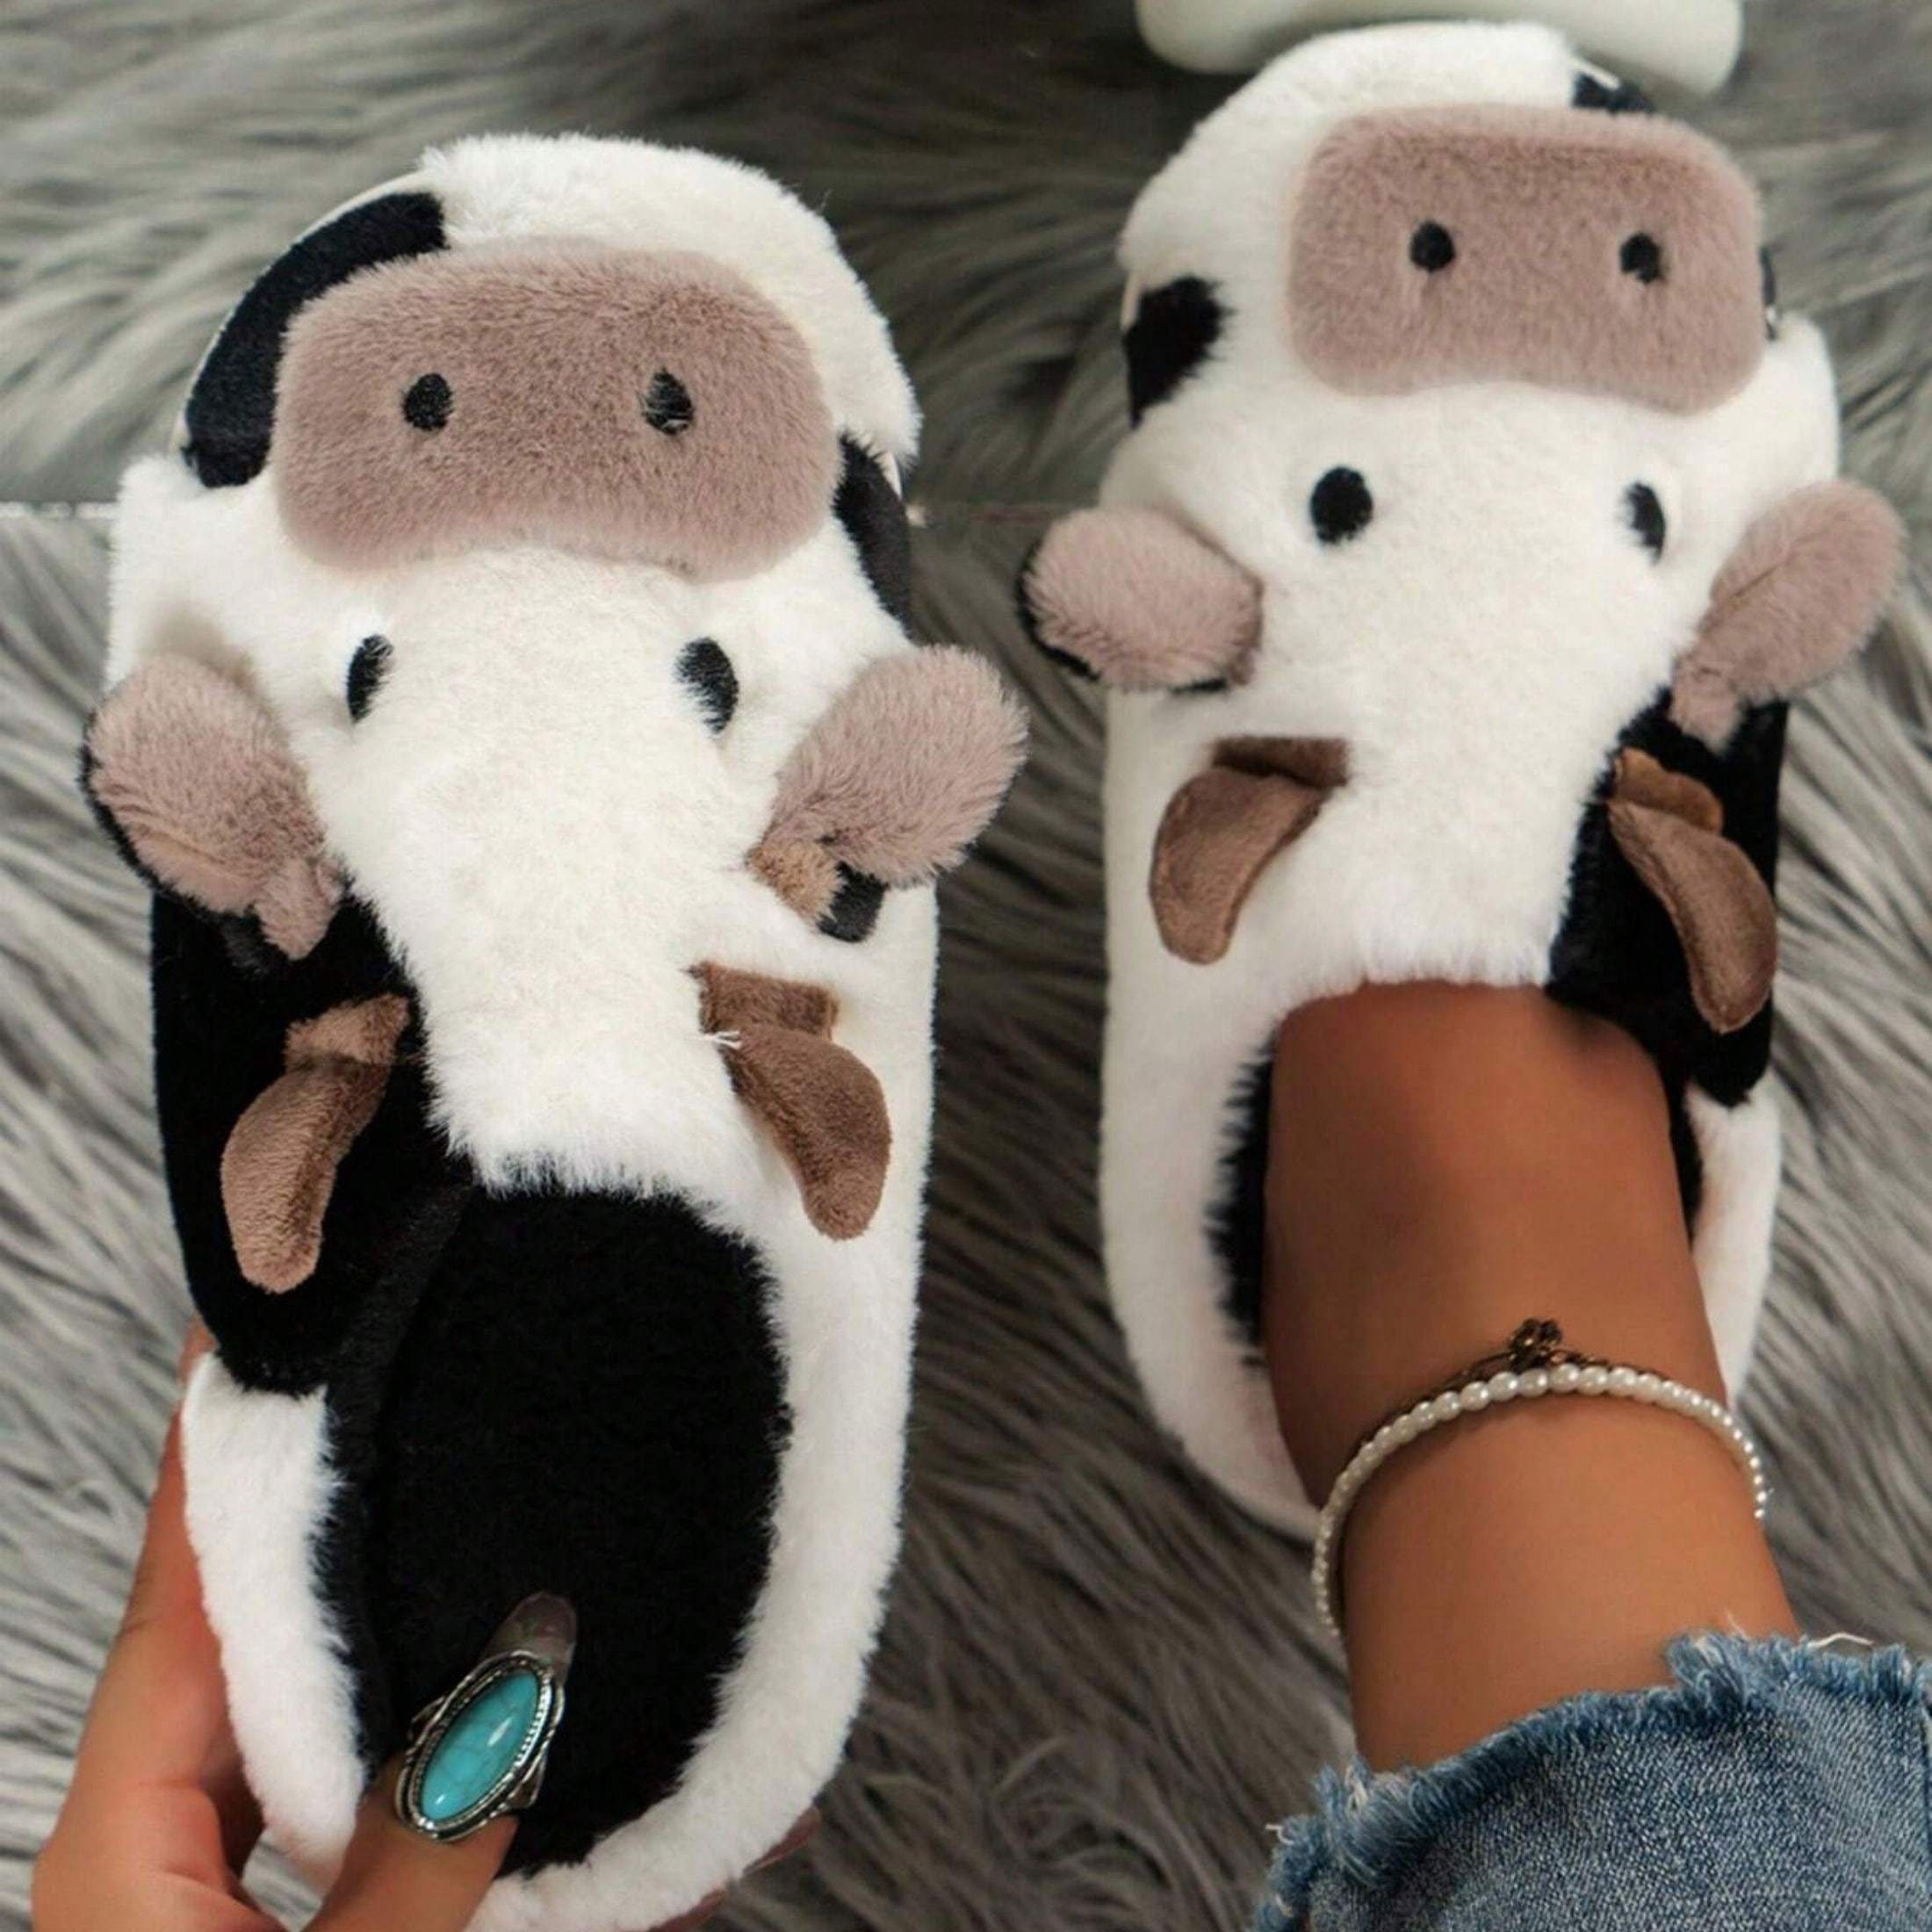 

Cow Slippers For Women, Plush Animal Slippers Winter Warm Soft Slippers, Home Sliders For Indoor & Outdoor, Winter & Autumn